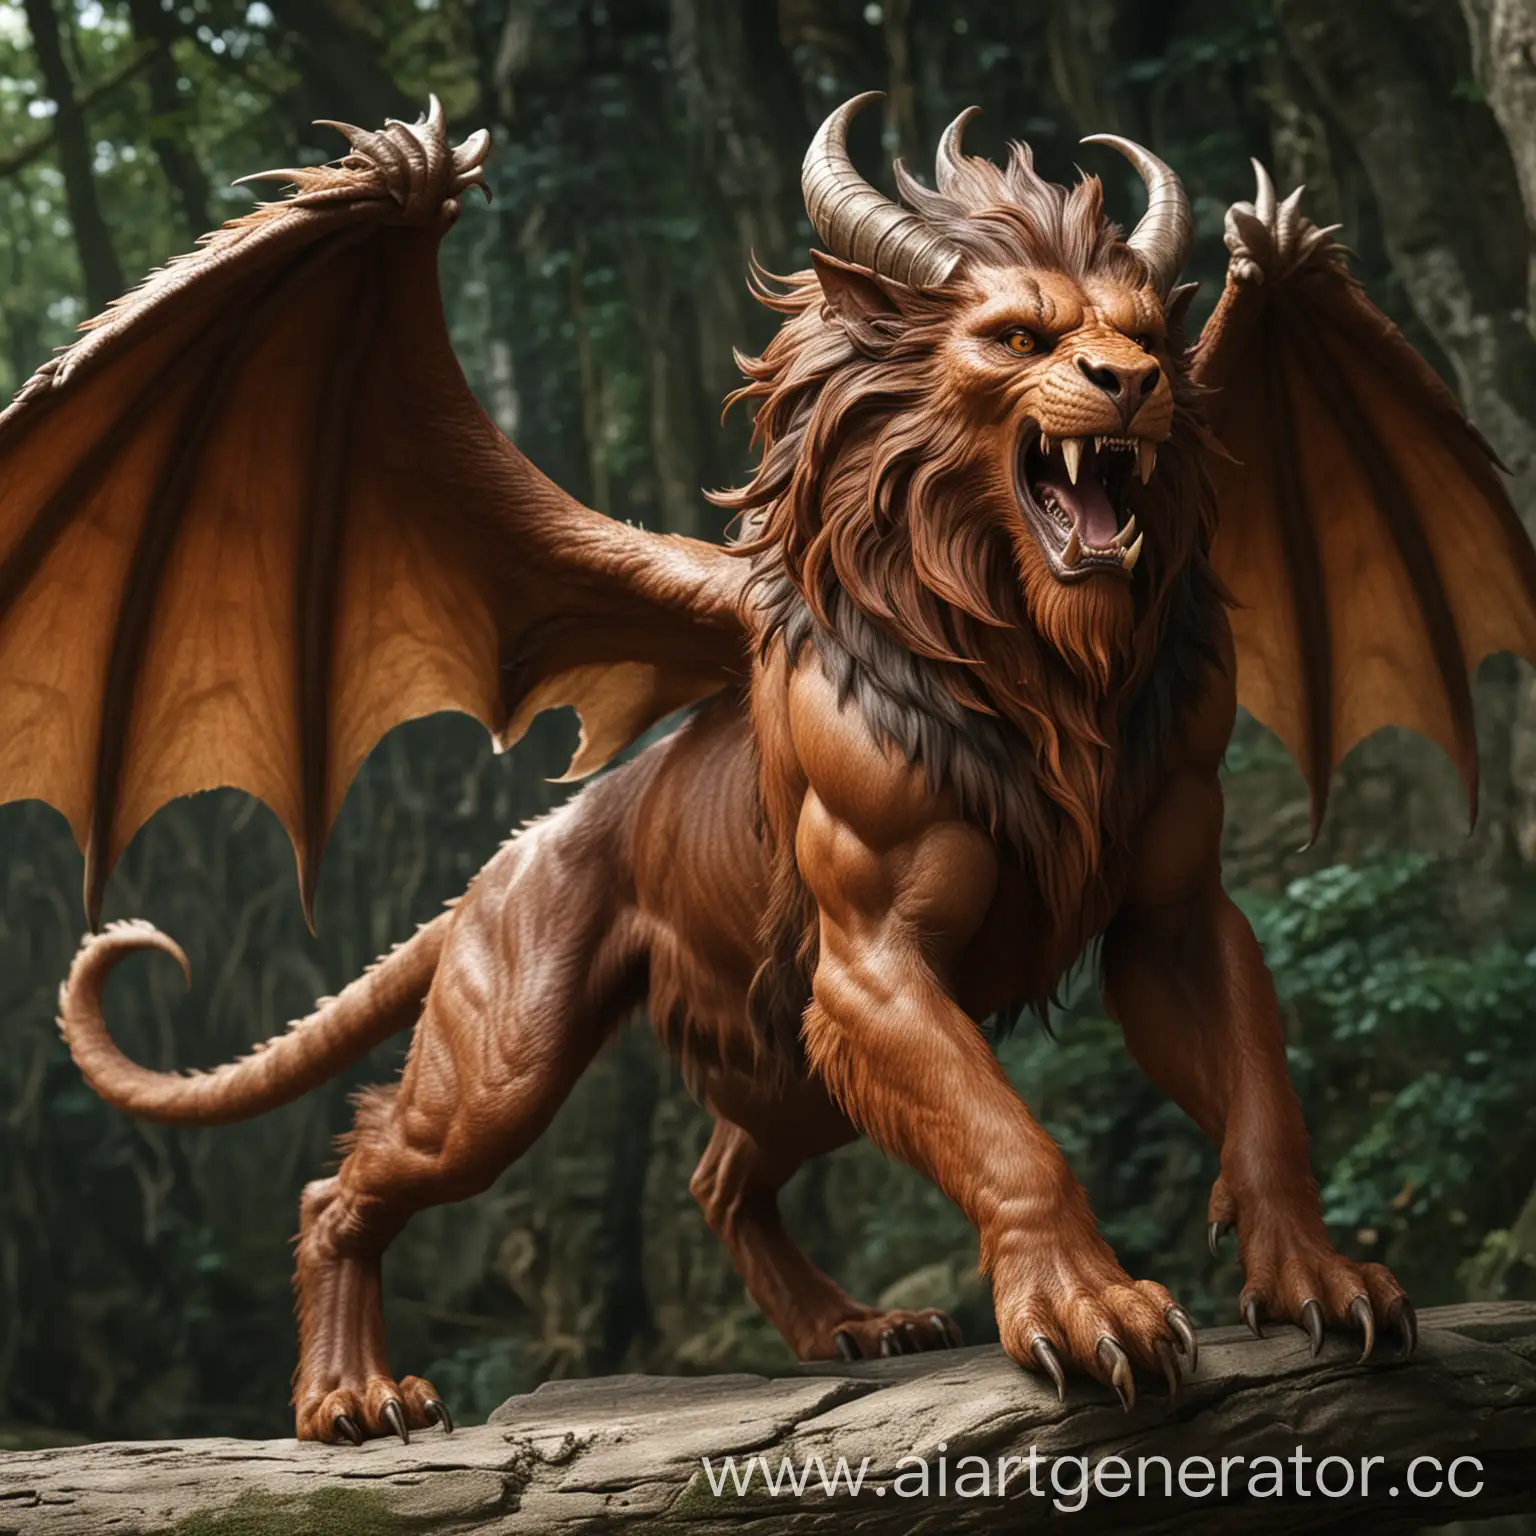 ManticoreLike-Creature-with-Wings-Limbs-and-Dragon-Horns